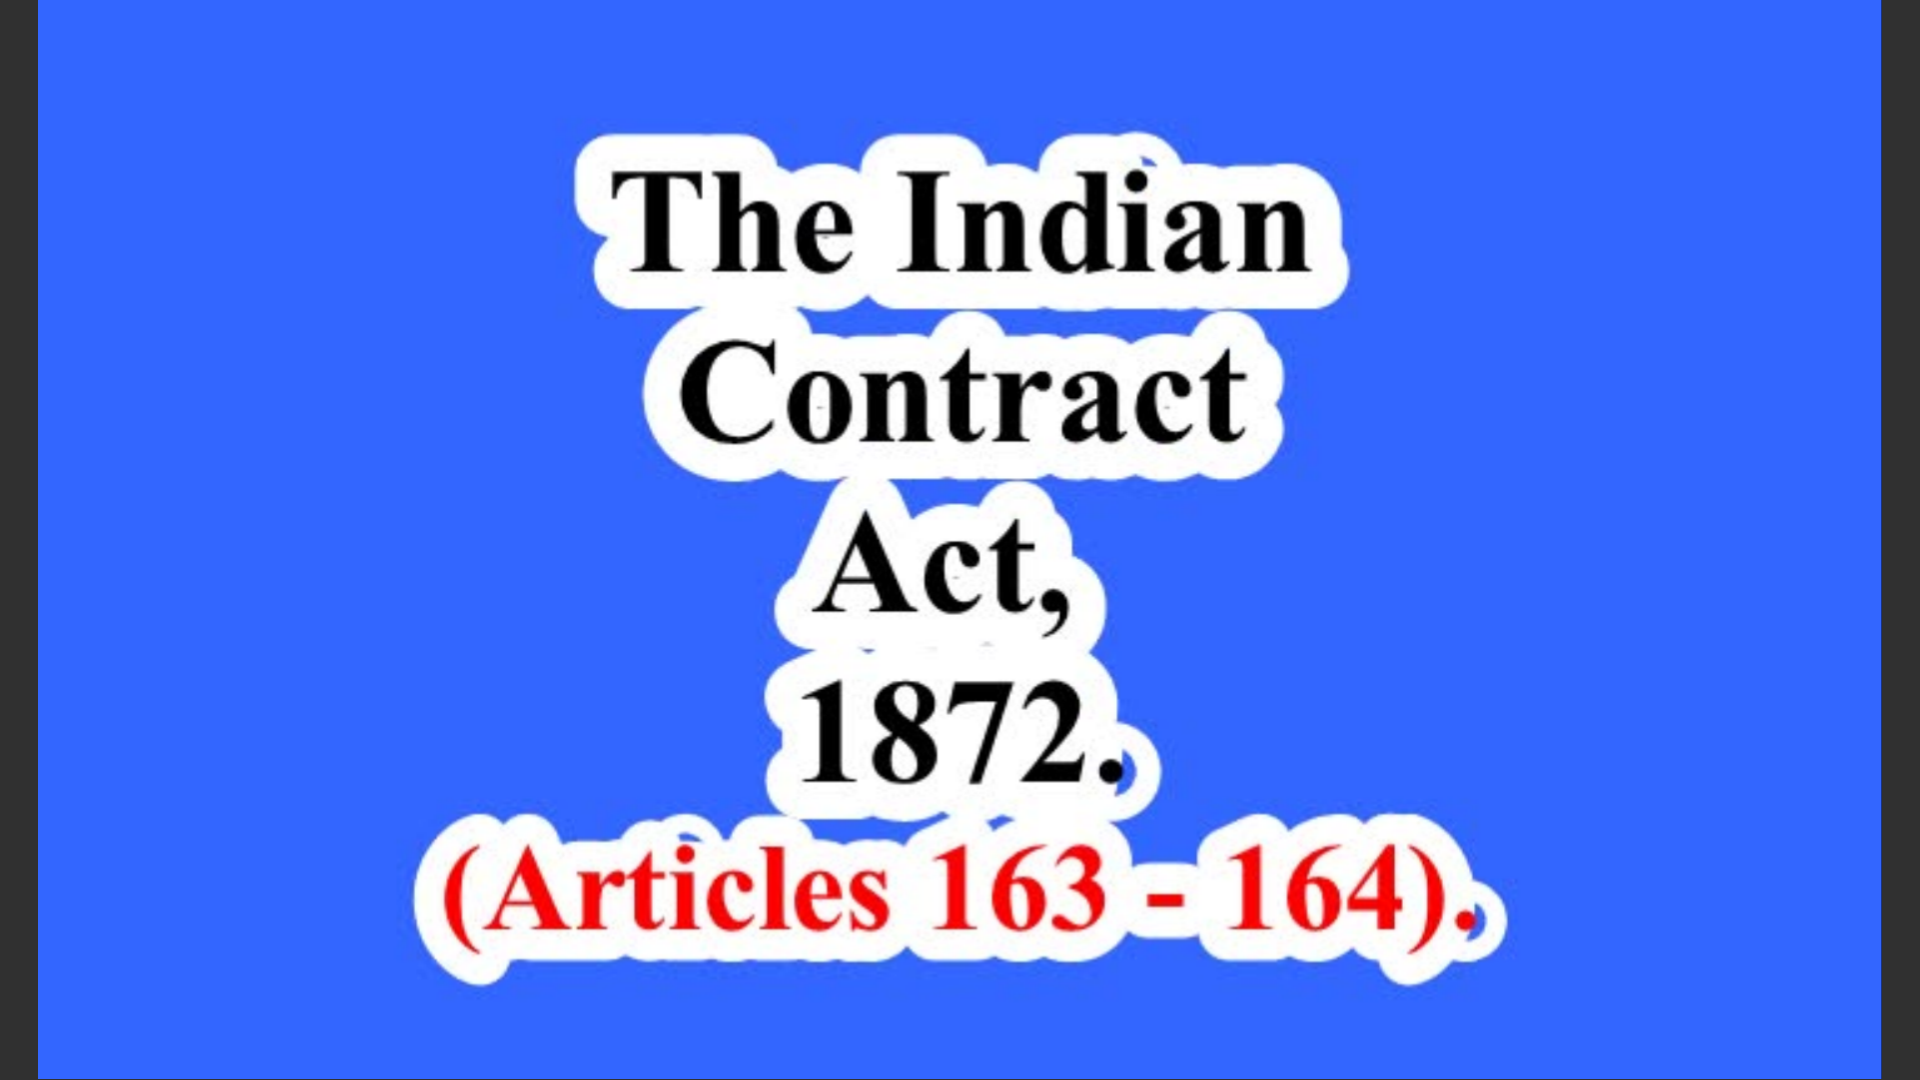 The Indian Contract Act, 1872. (Articles 163 – 164).